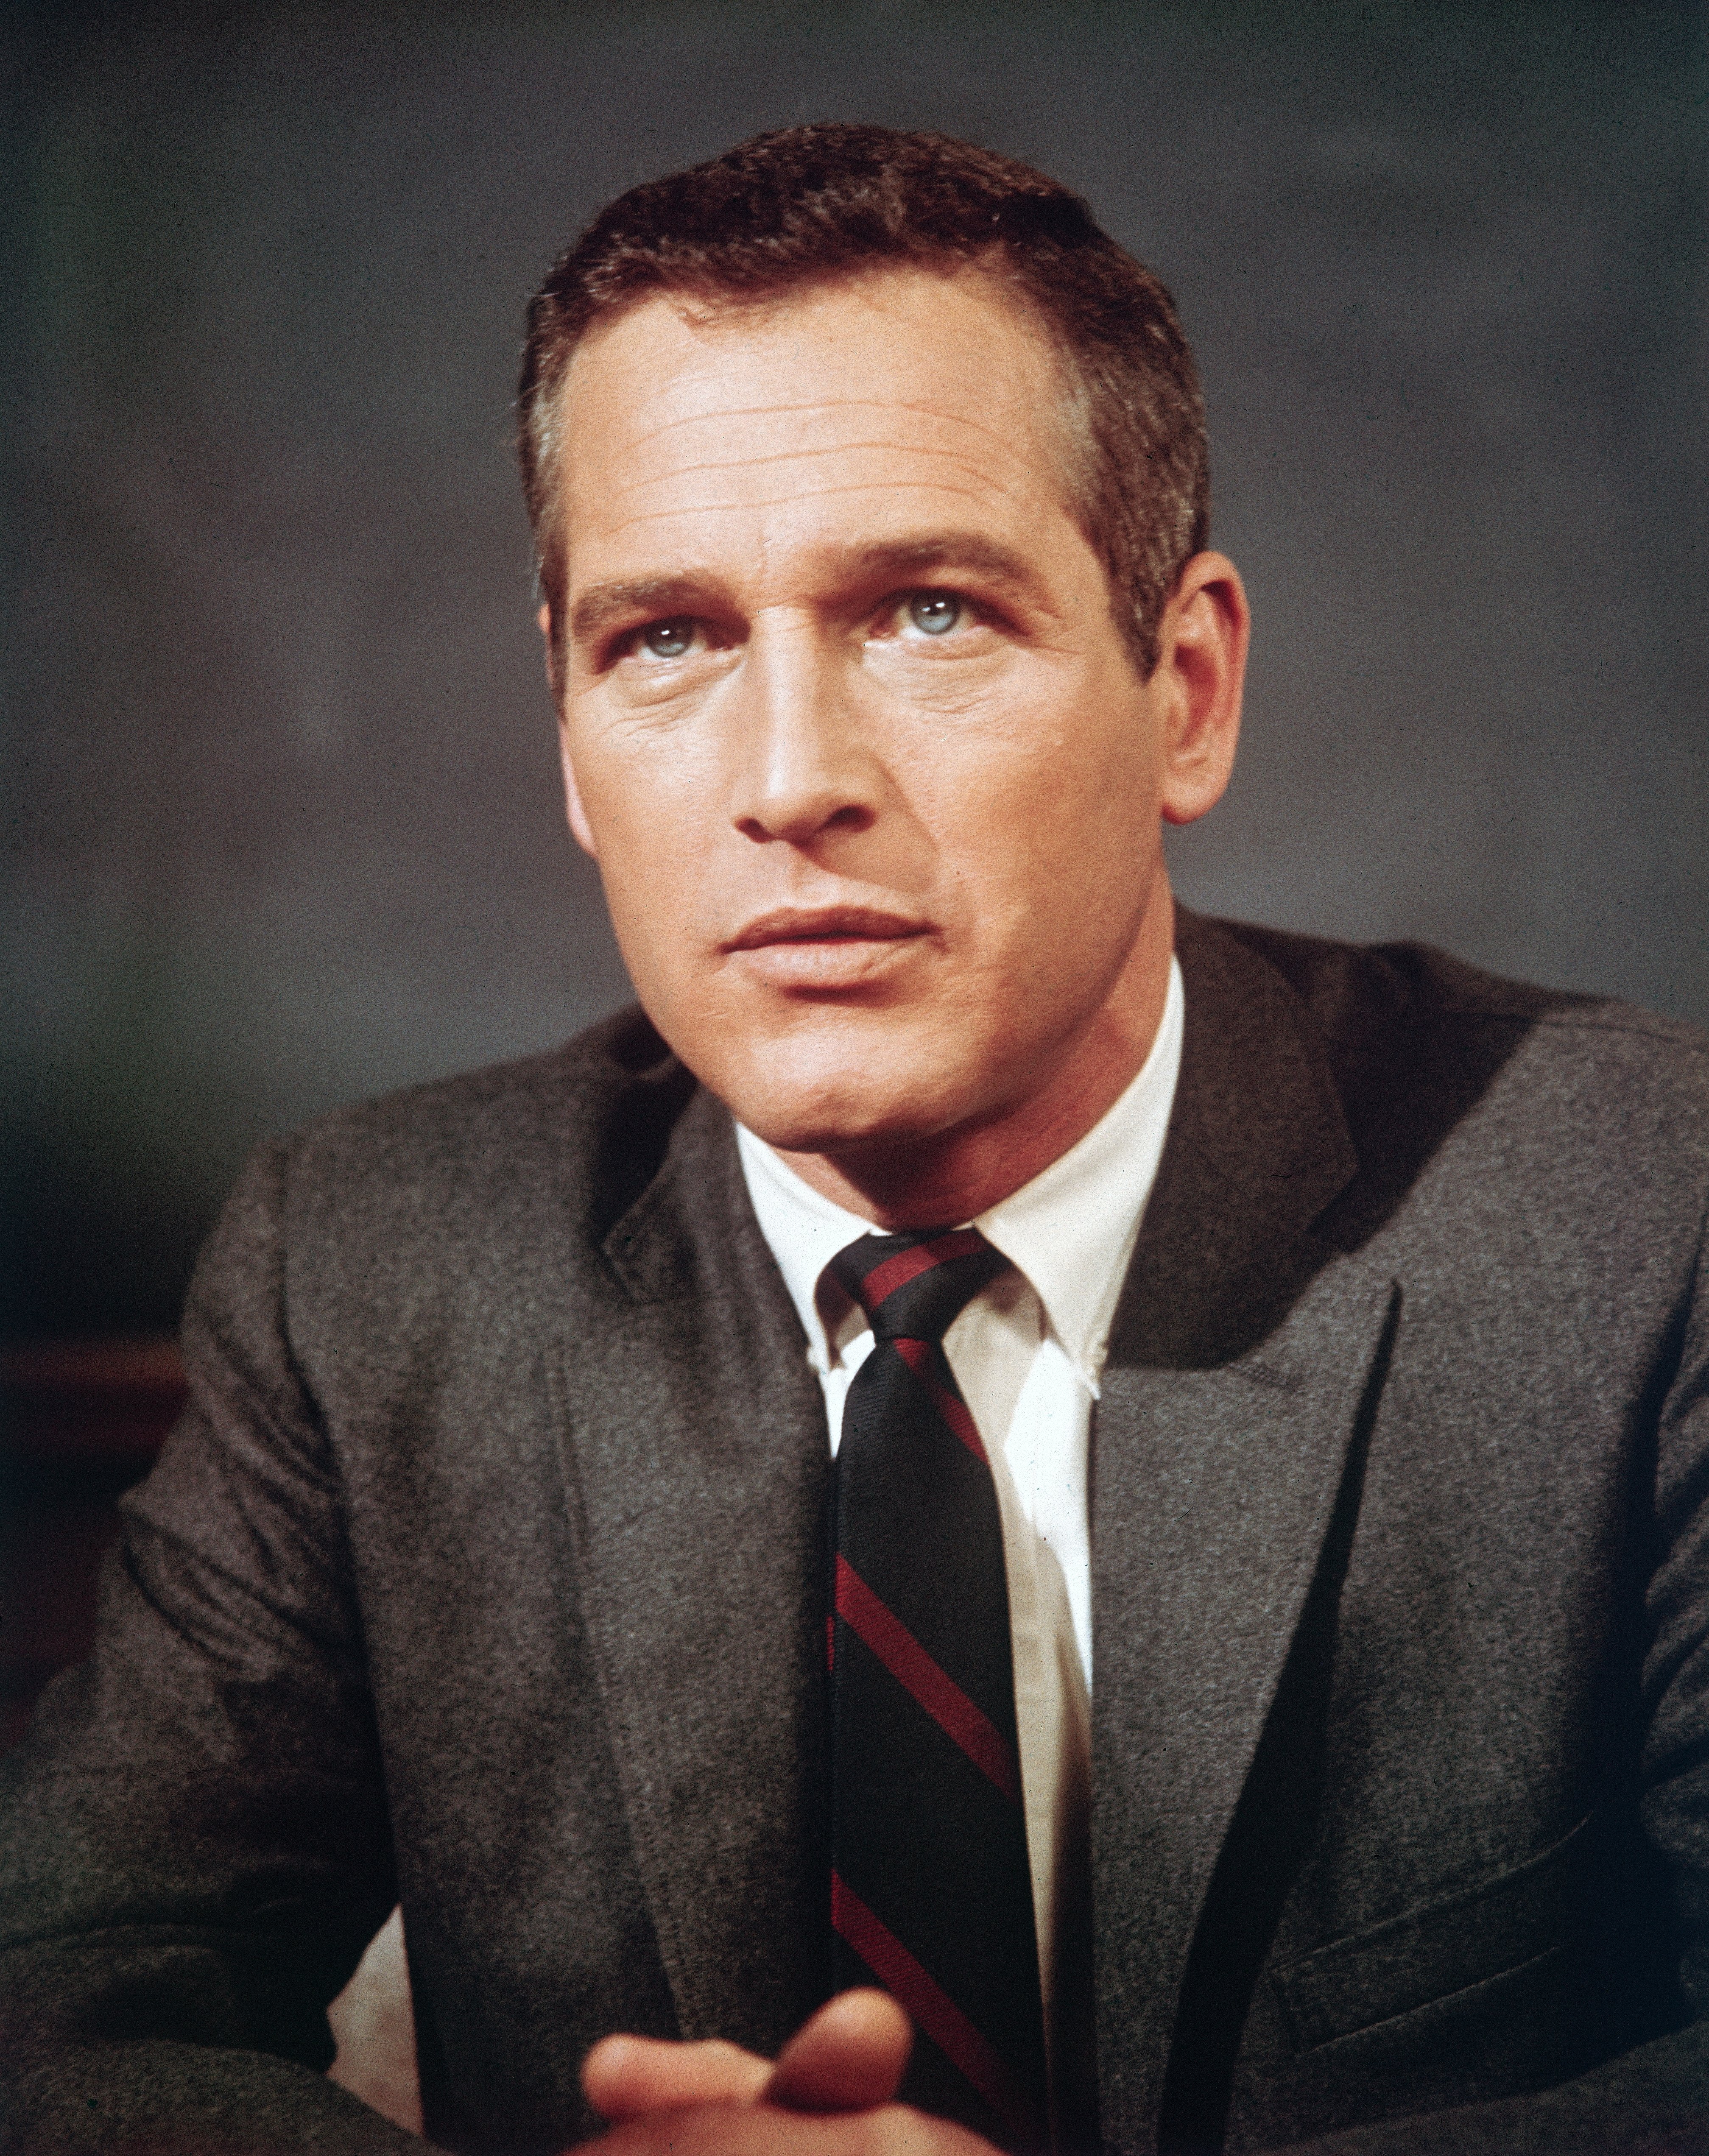 Pictured: Paul Newman poses wearing a jacket and tie in 1965 | Photo: Getty Images